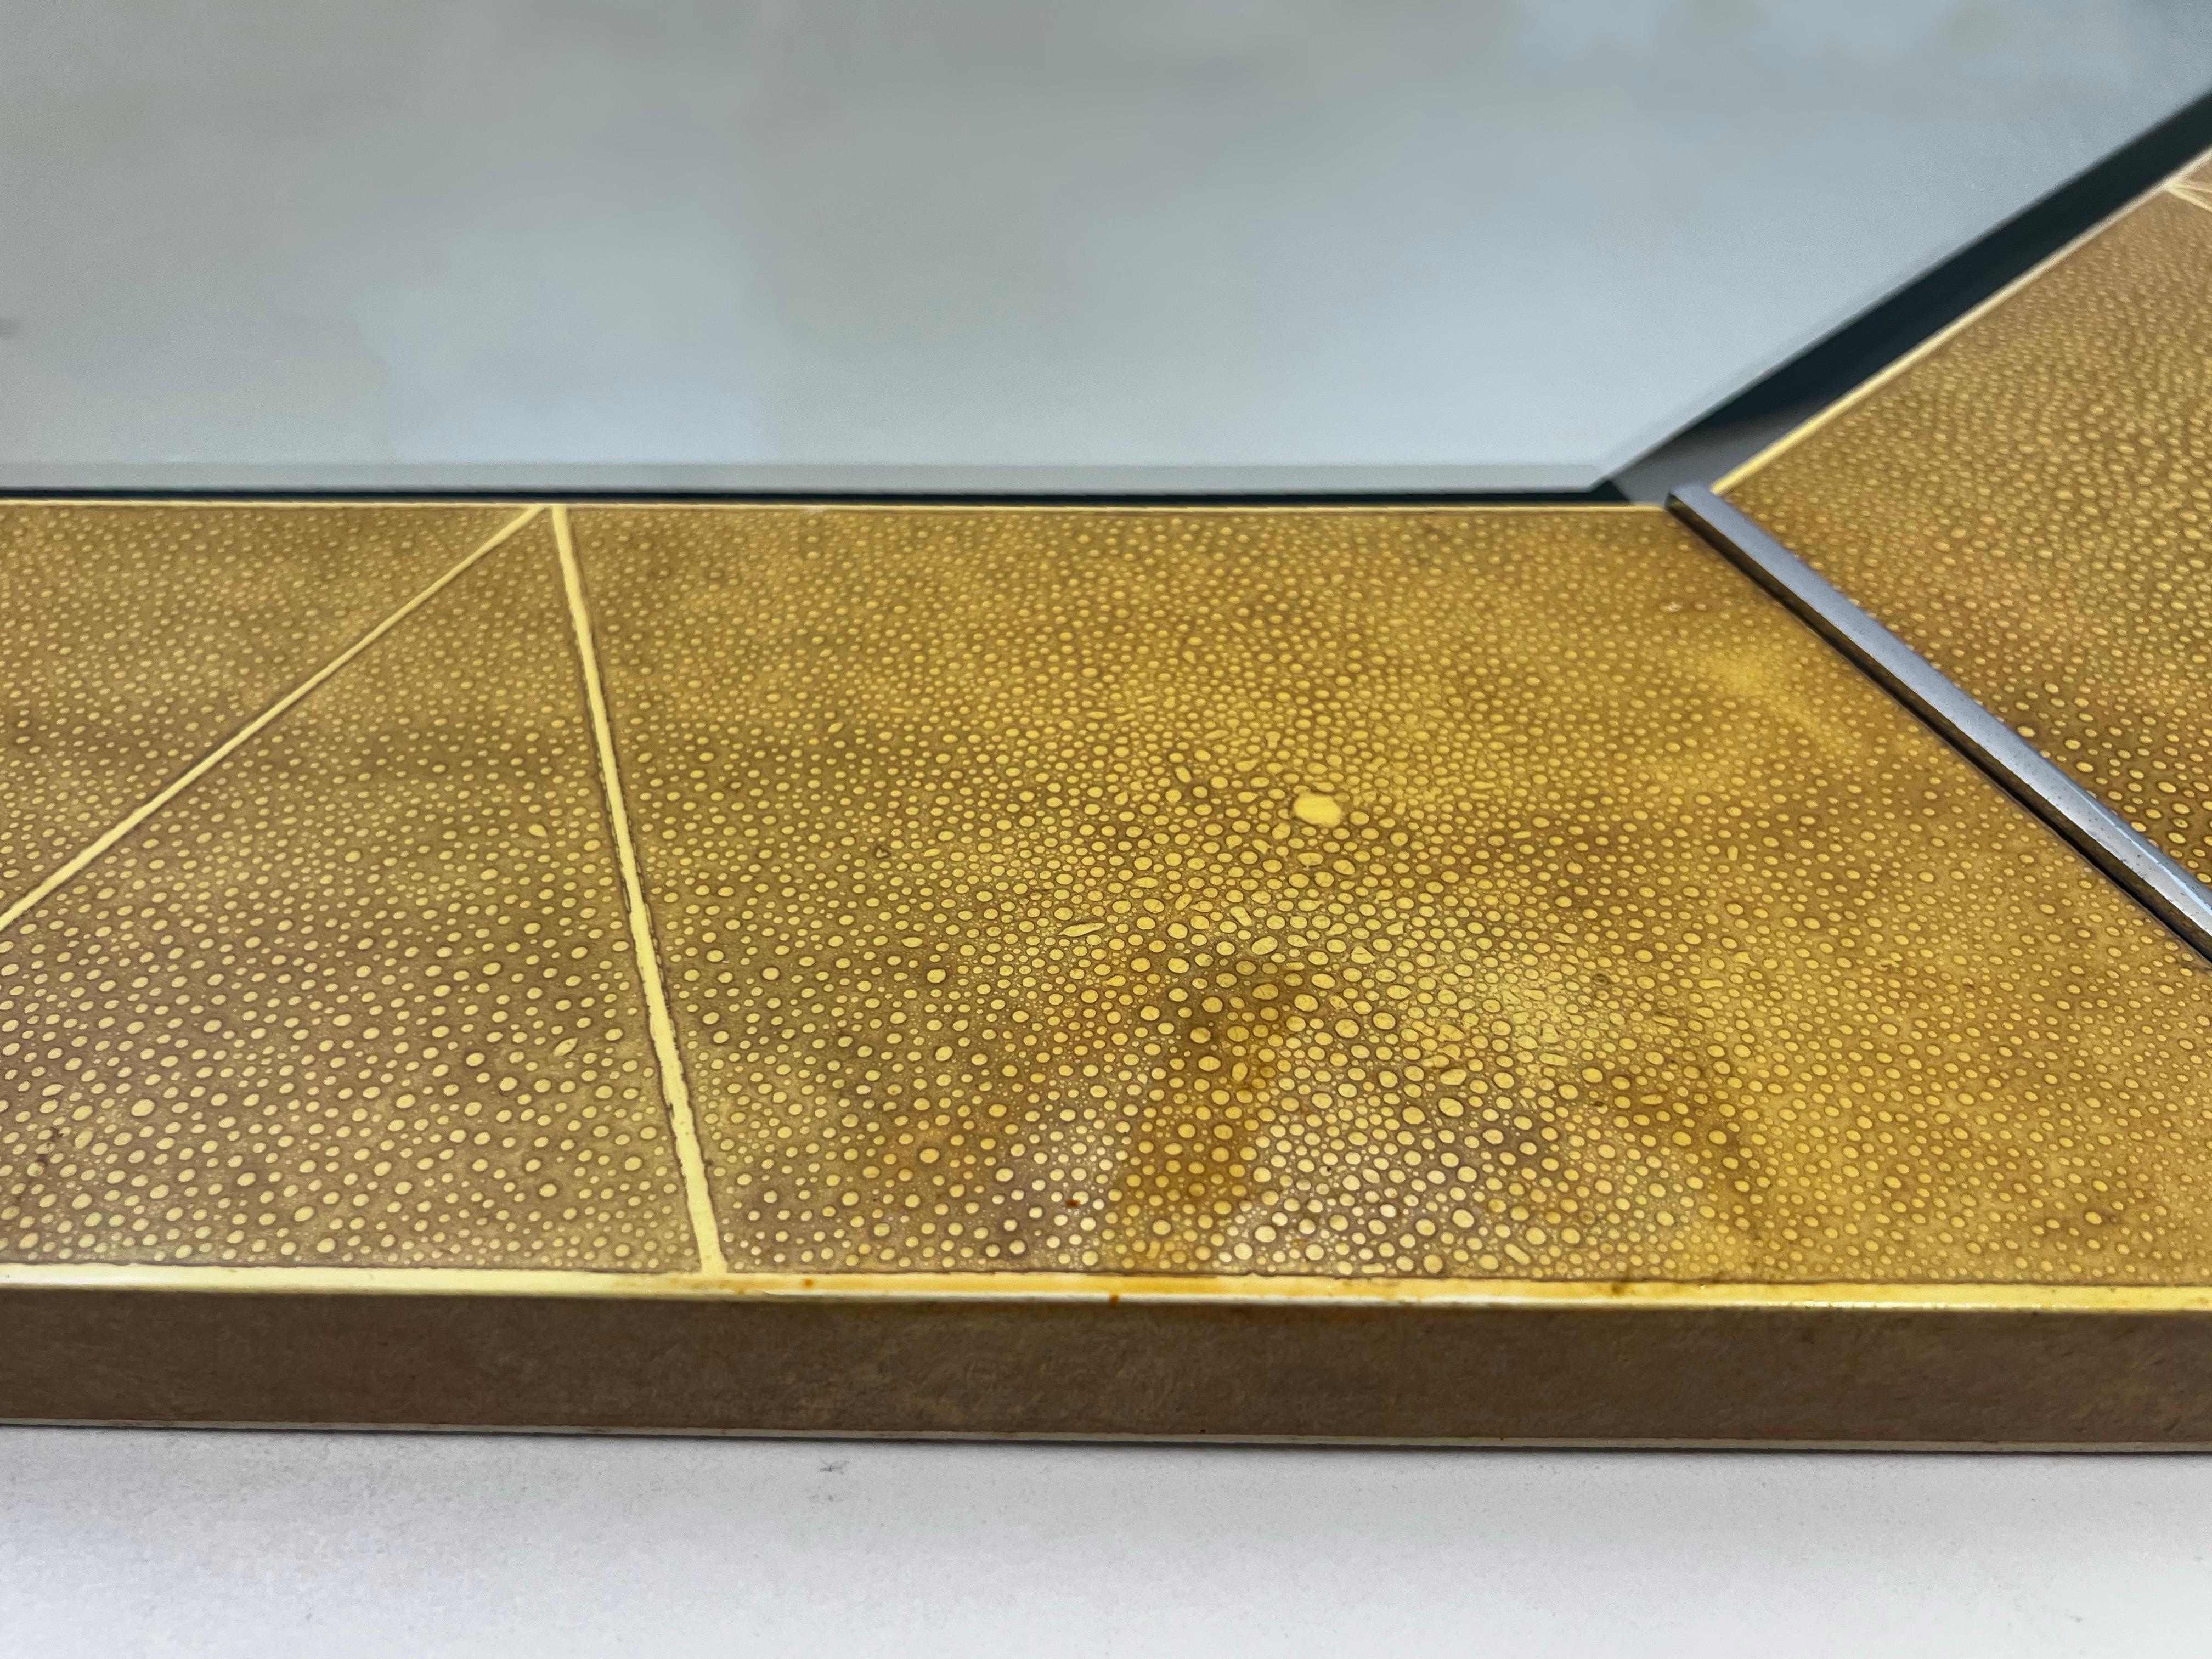 Hand-Crafted Octagonal Shagreen Lacquer and Chrome Mirror by Karl Springer for Suzanne Sumers For Sale